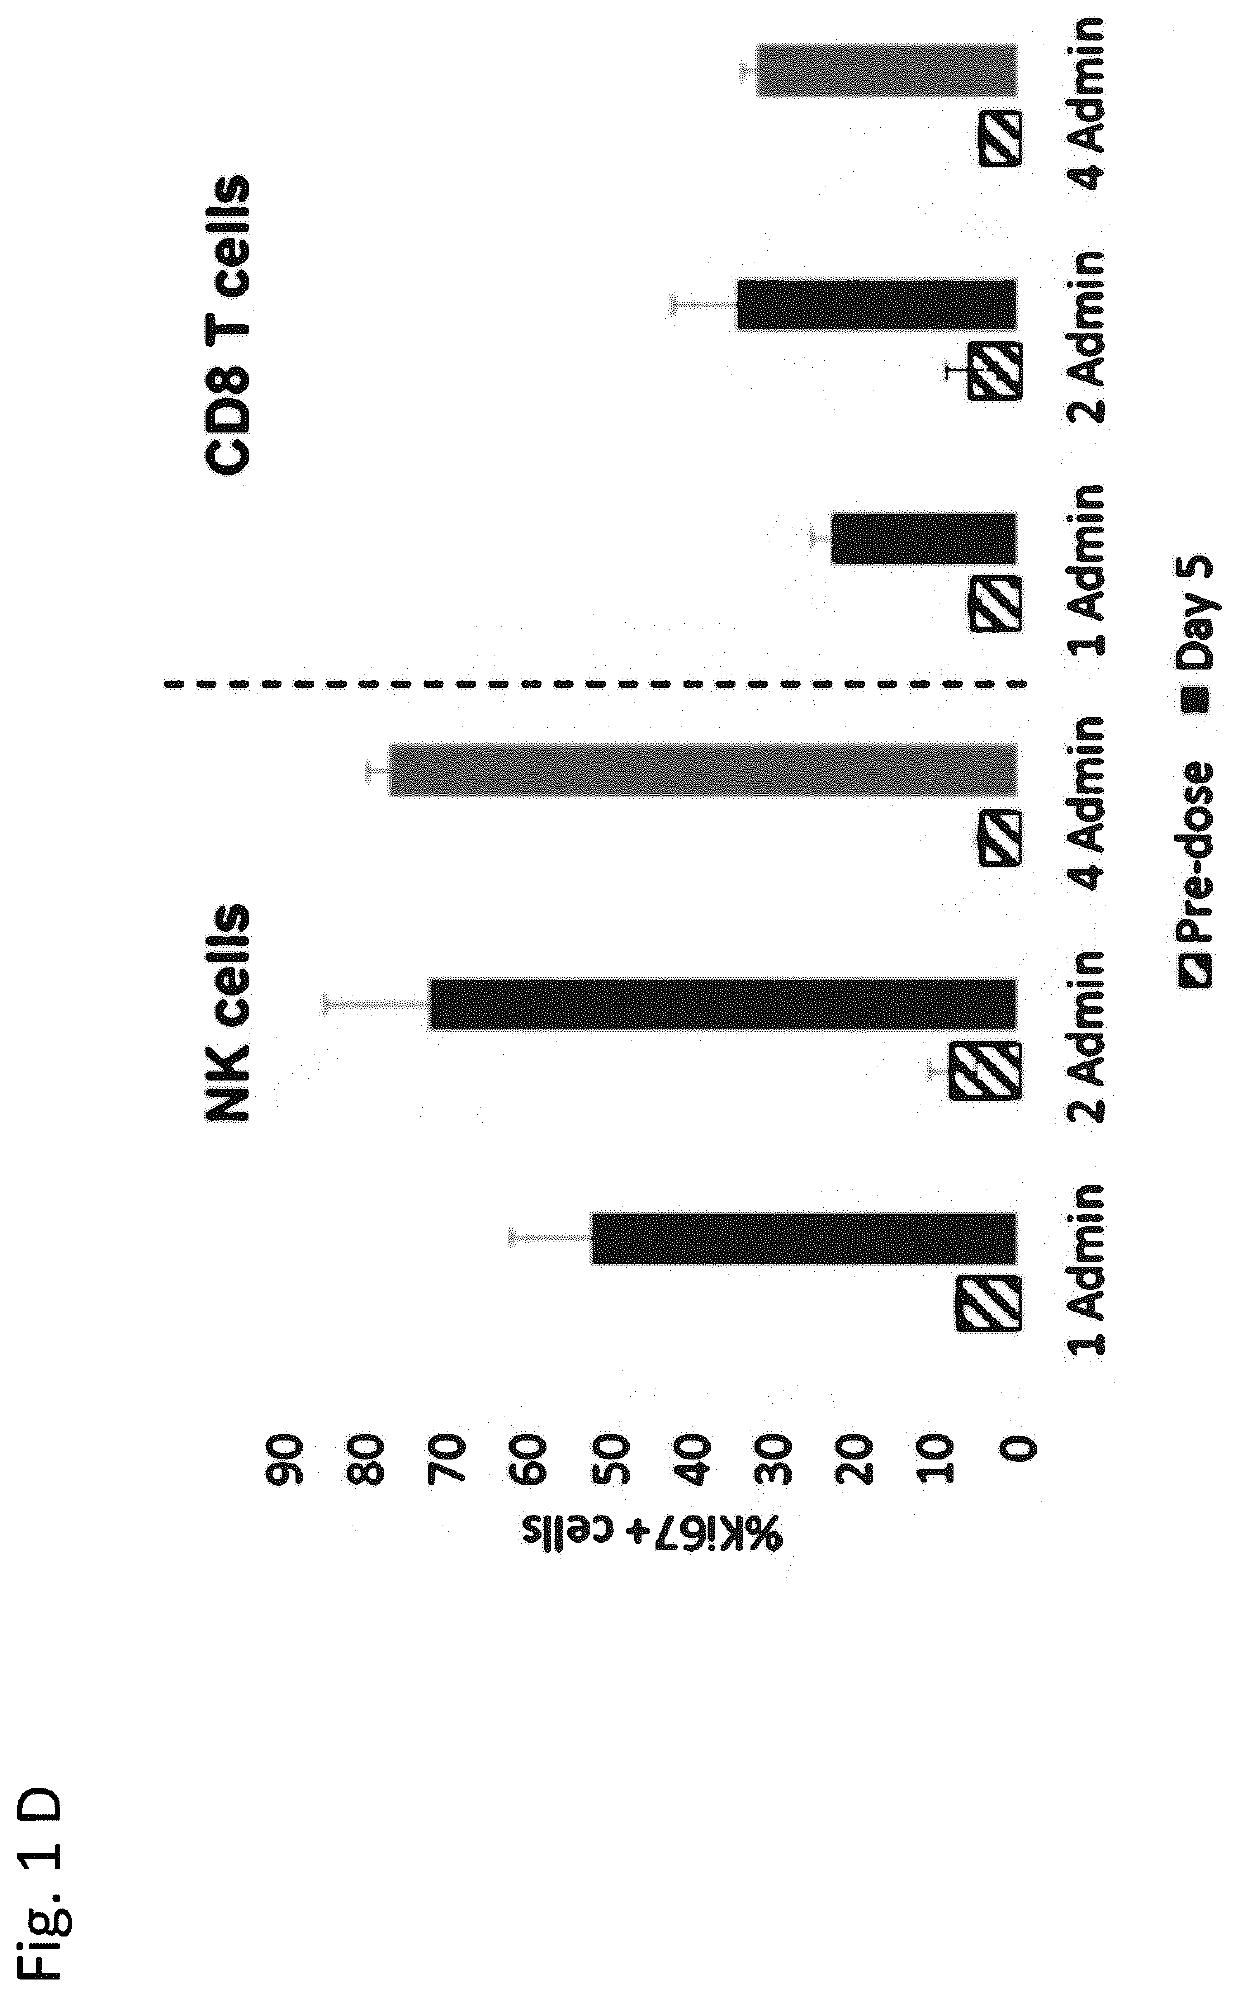 Il-2/il-15r beta gamma agonist dosing regimens for treating cancer or infectious diseases